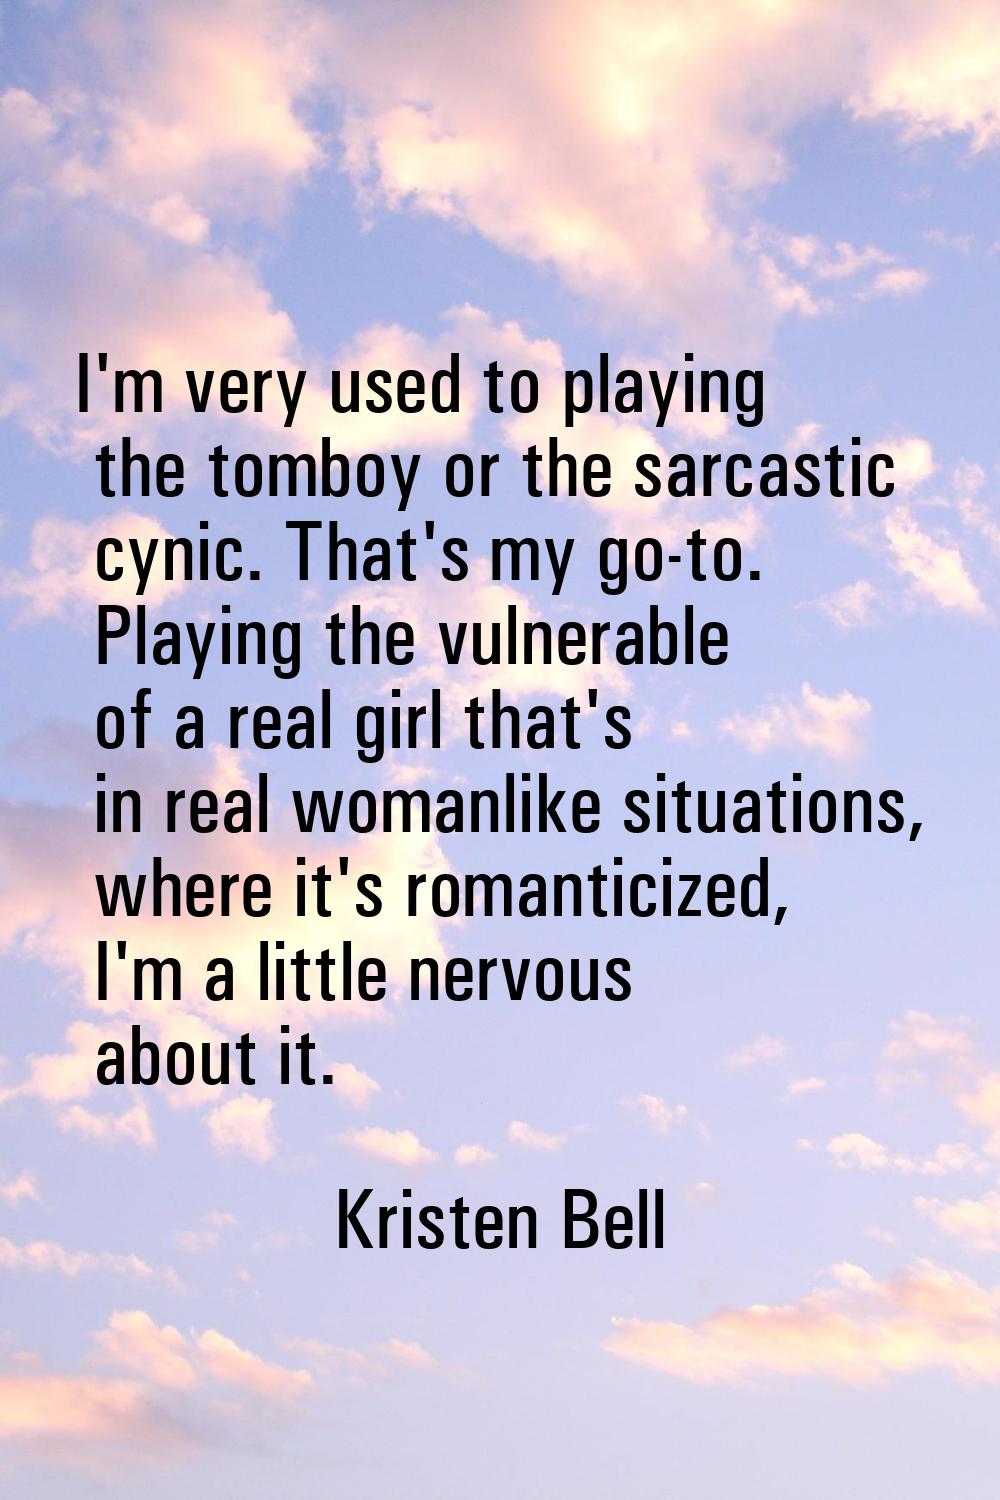 I'm very used to playing the tomboy or the sarcastic cynic. That's my go-to. Playing the vulnerable